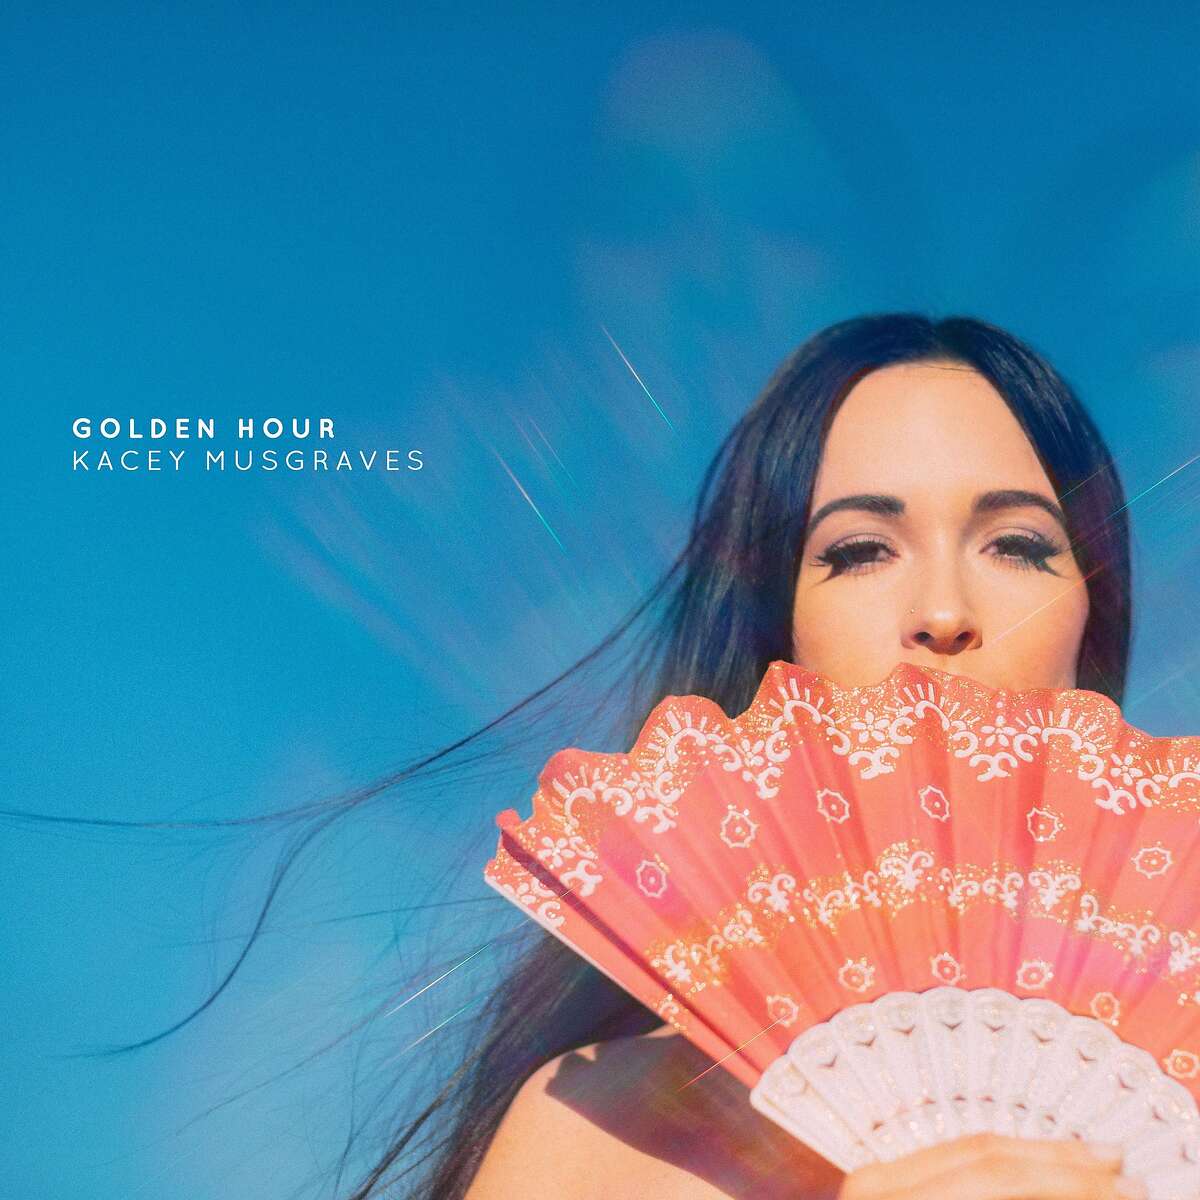 Kacey Musgraves' latest album is 'Golden Hour'